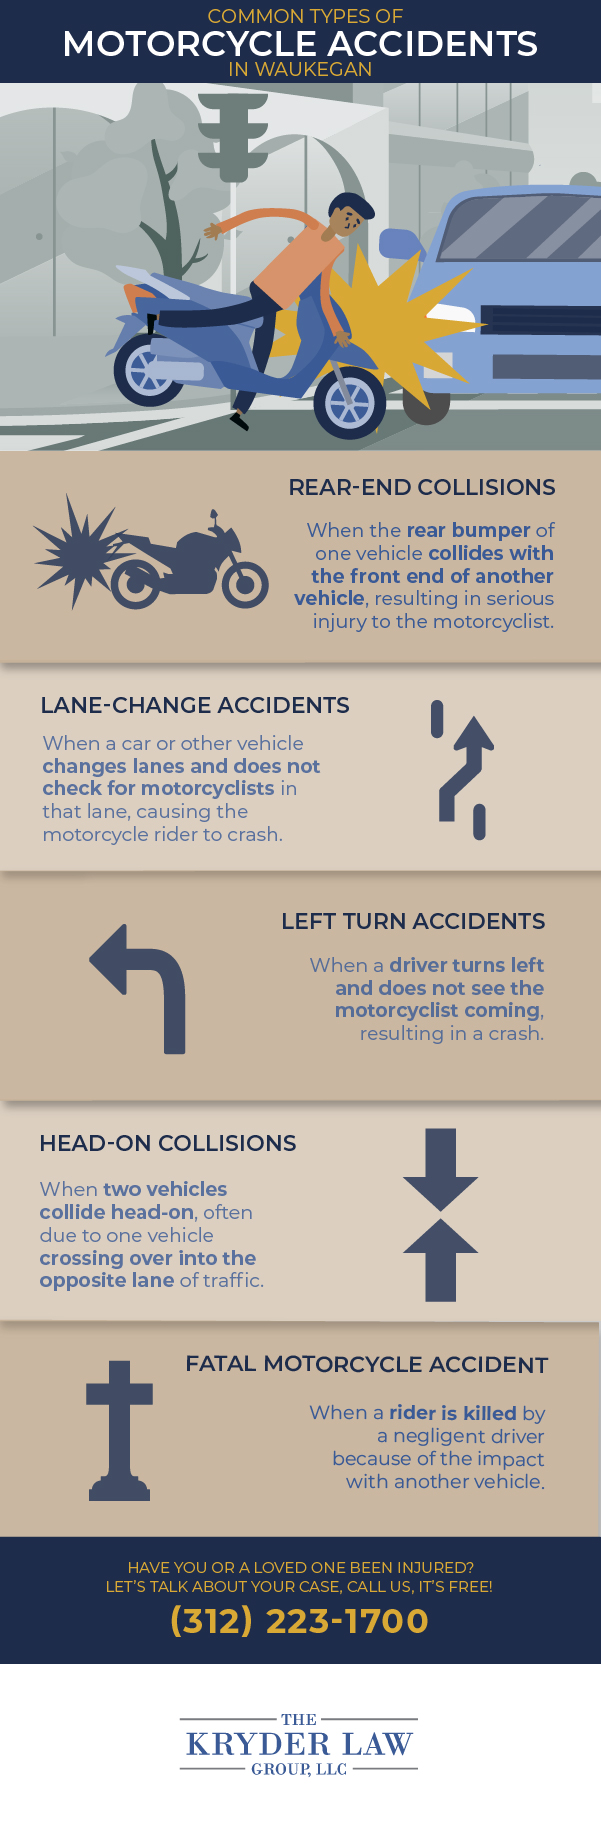 Common Types of Motorcycle Accidents in Waukegan